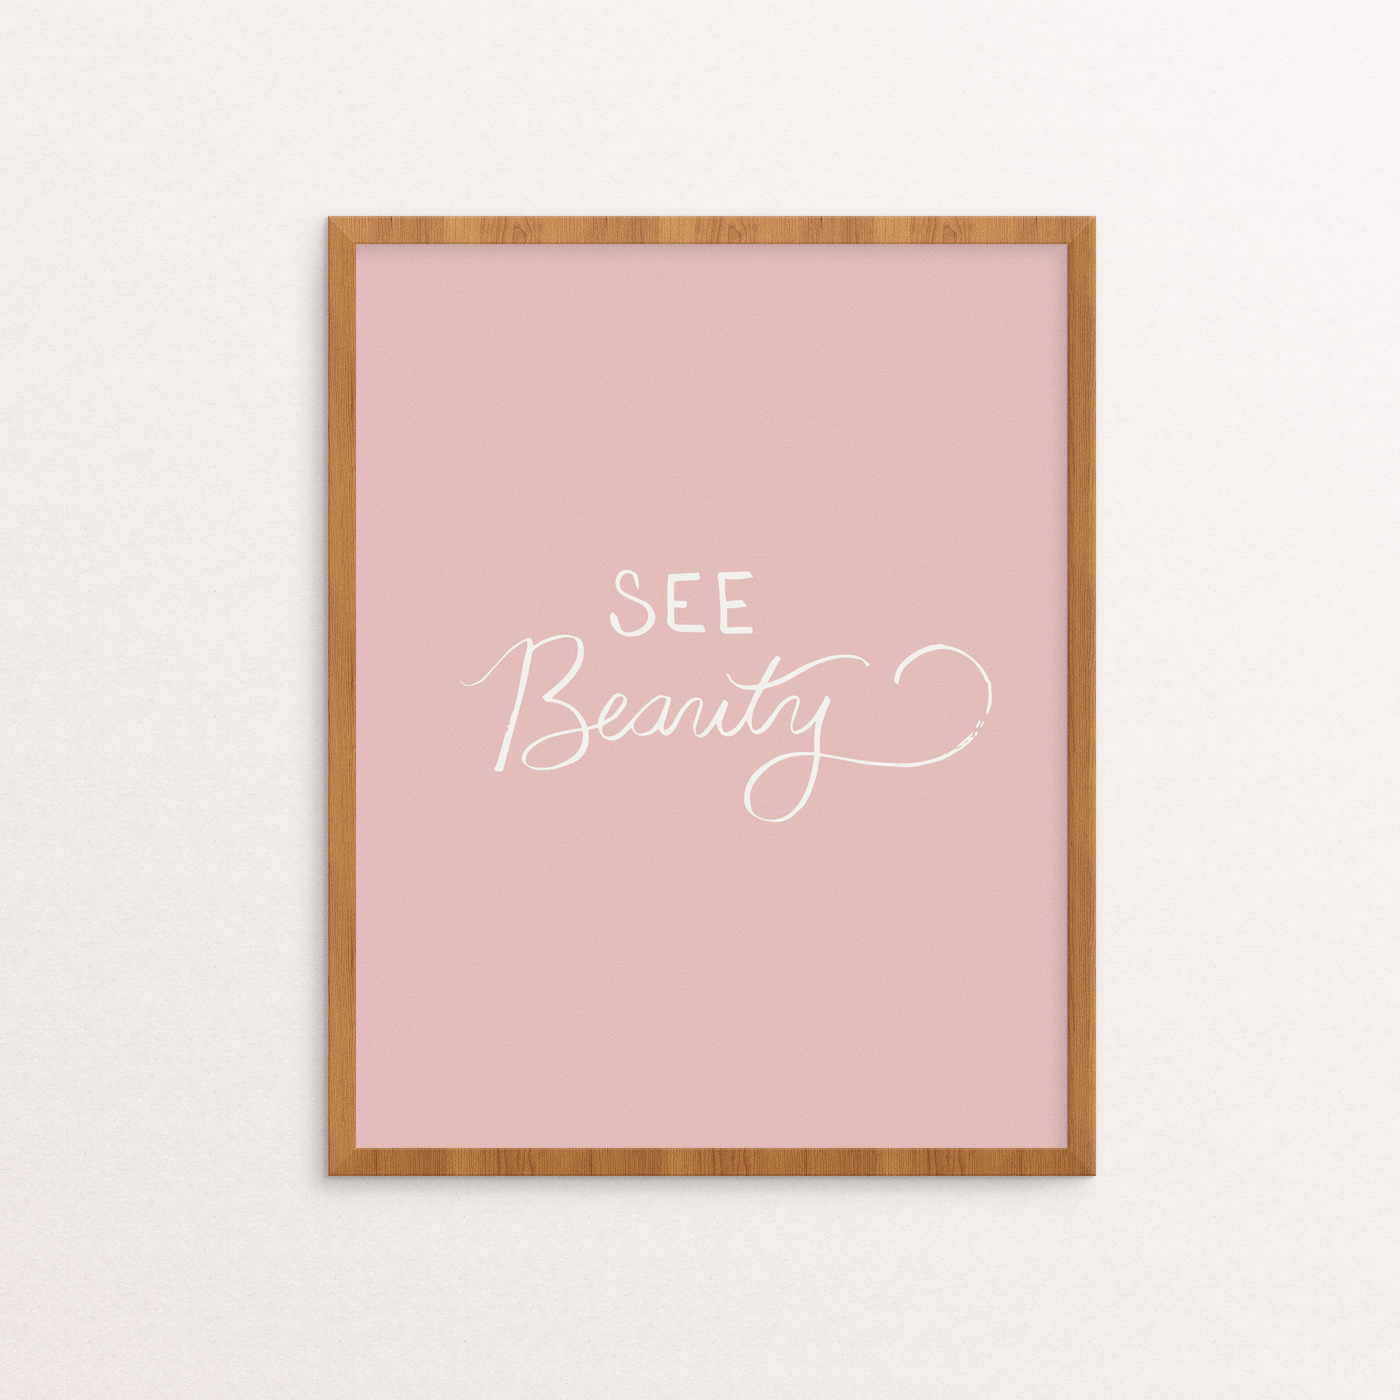 Art print with "See Beauty" hand lettered in white on a soft pink background